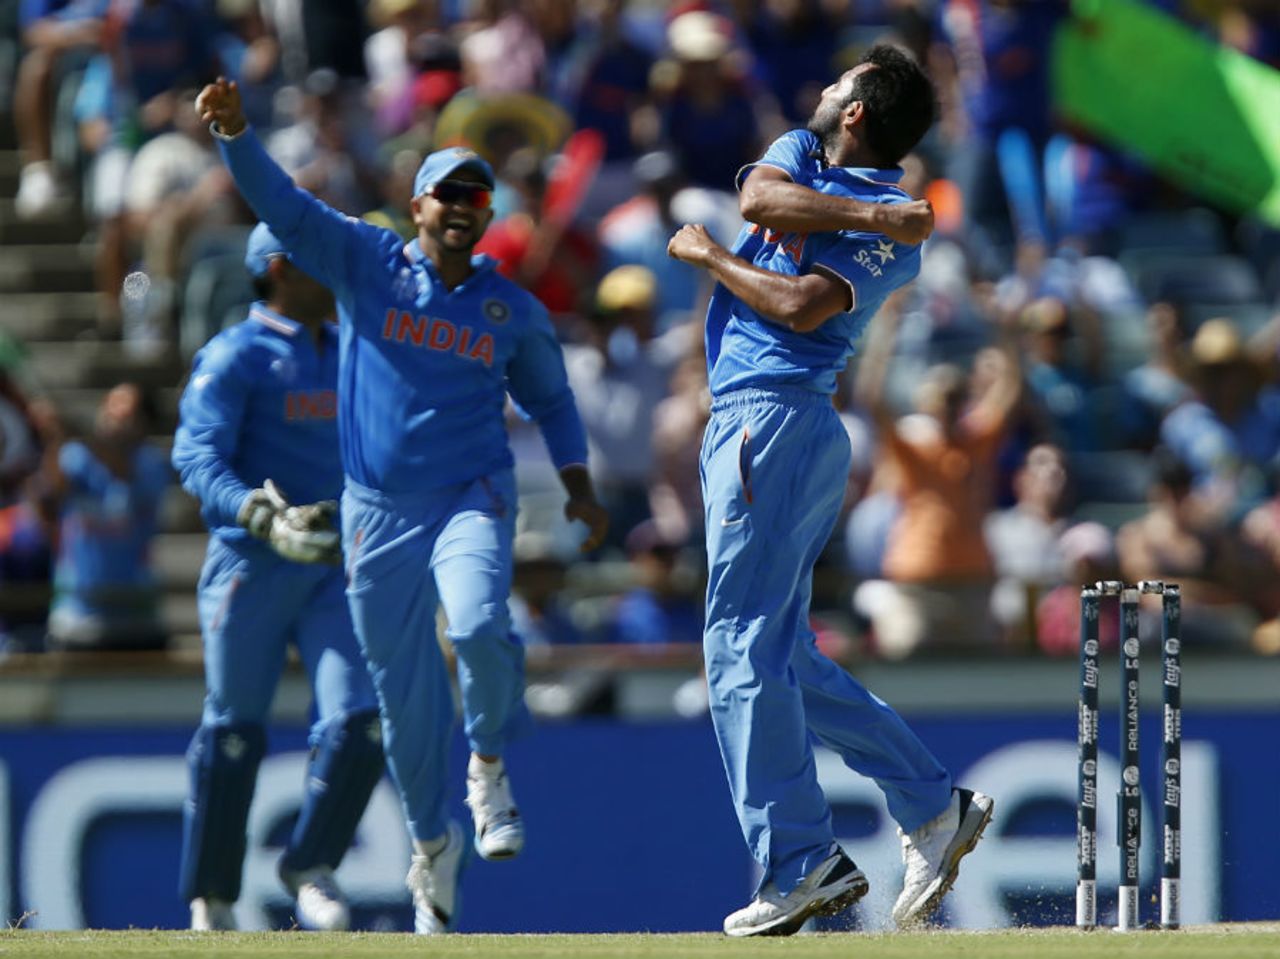 Mohammed Shami celebrates the wicket of Dwayne Smith, India v West Indies, World Cup 2015, Group B, Perth, March 6